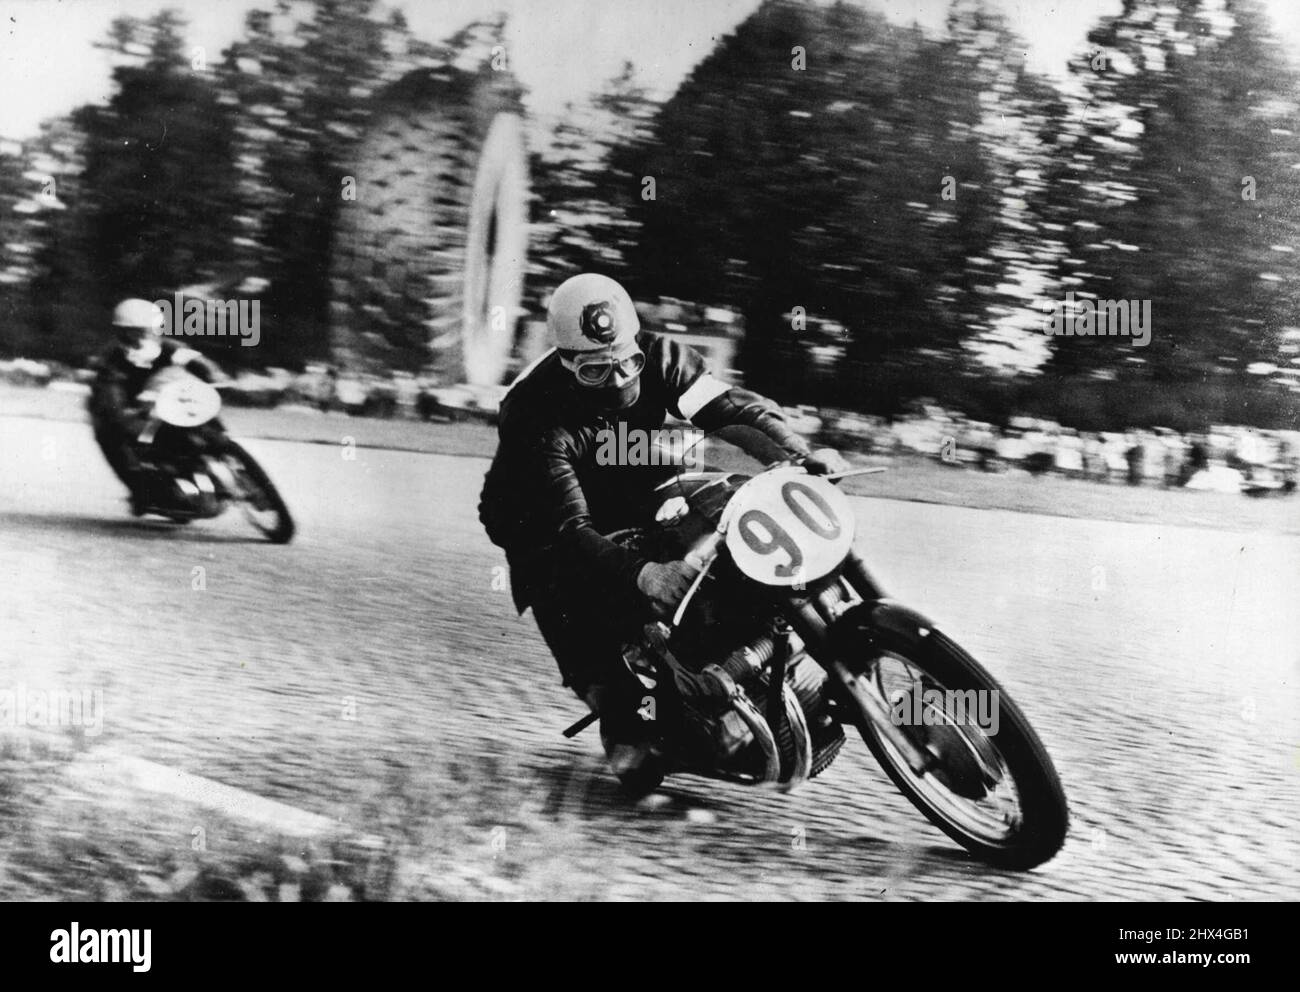 Duke Leads The World -- In the lead... Geoff Duke on a 500 C.C. Gilera, leads the field during the Italian Grand Prix. Geoff Duke, who won the Italian grand Prix at Monza on Sunday, new leads in the 500 class world championships. September 10, 1953. (Photo by Paul Popper, Paul Popper Ltd.). Stock Photo